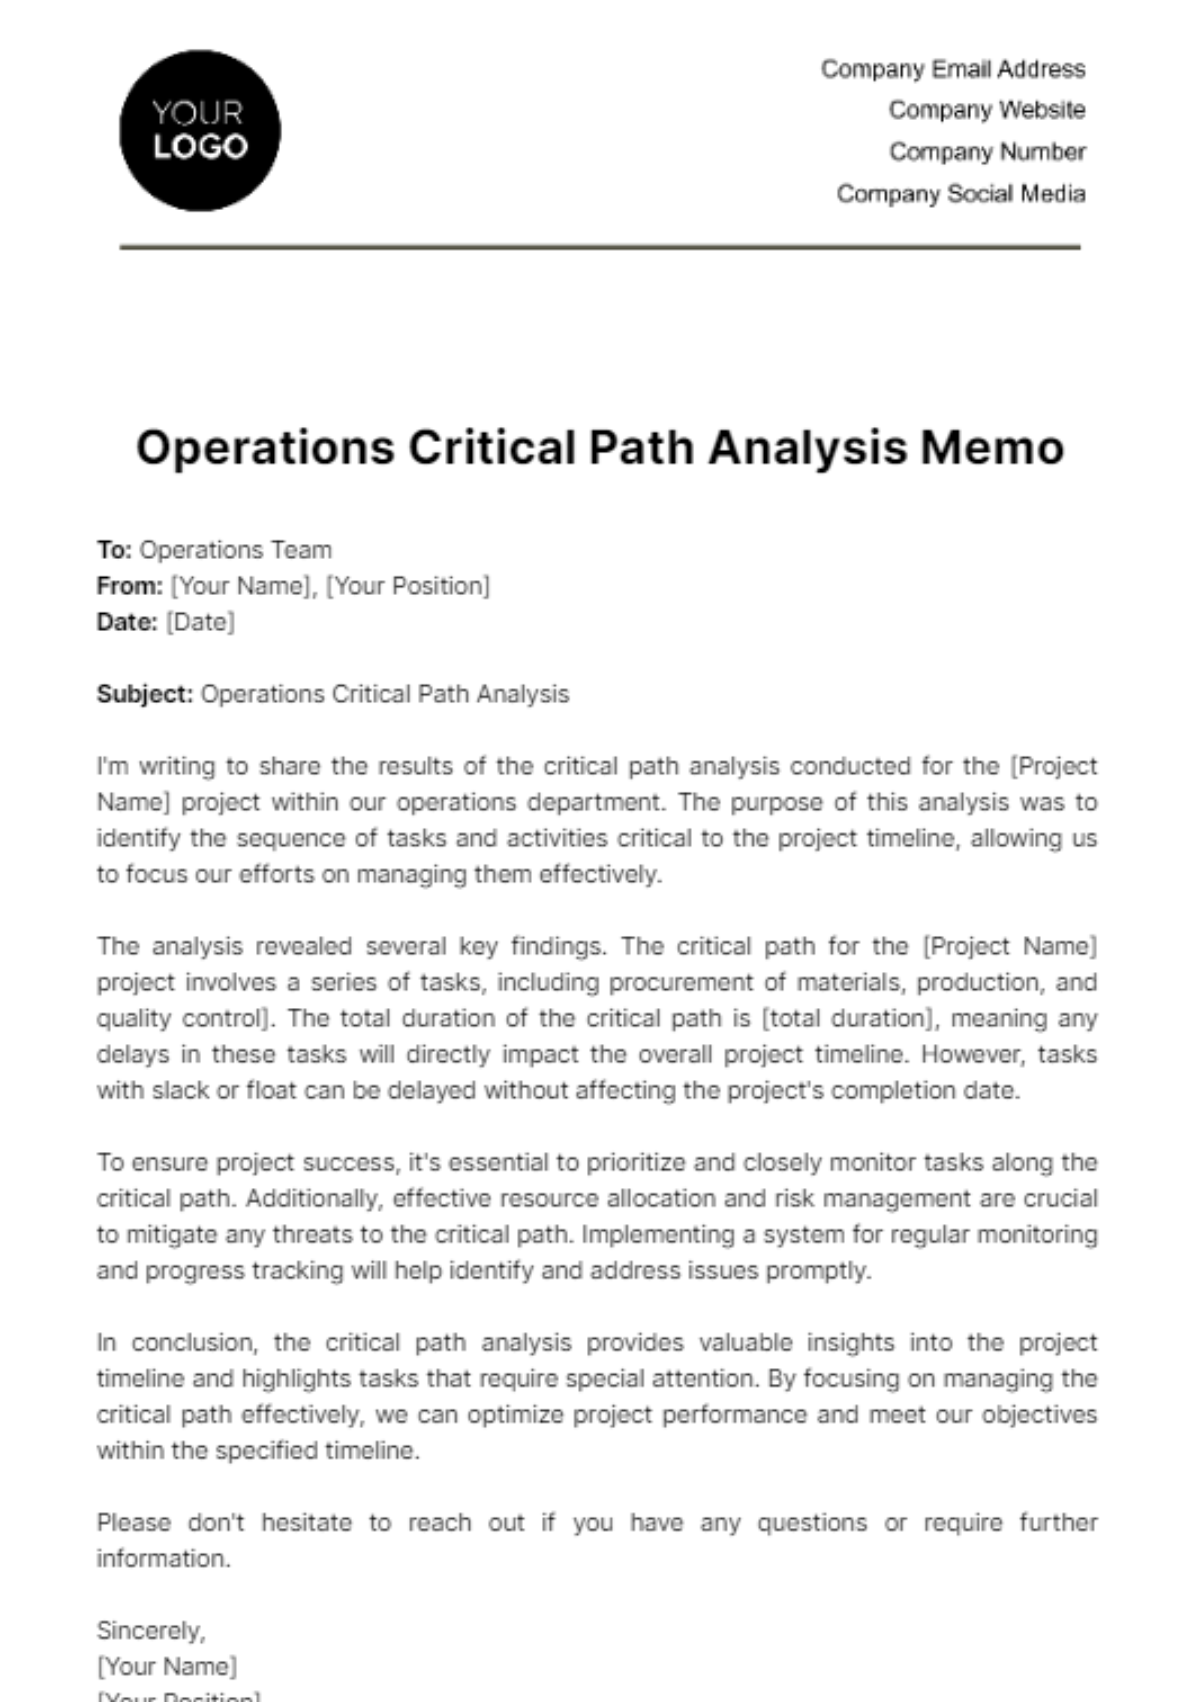 Free Operations Critical Path Analysis Memo Template